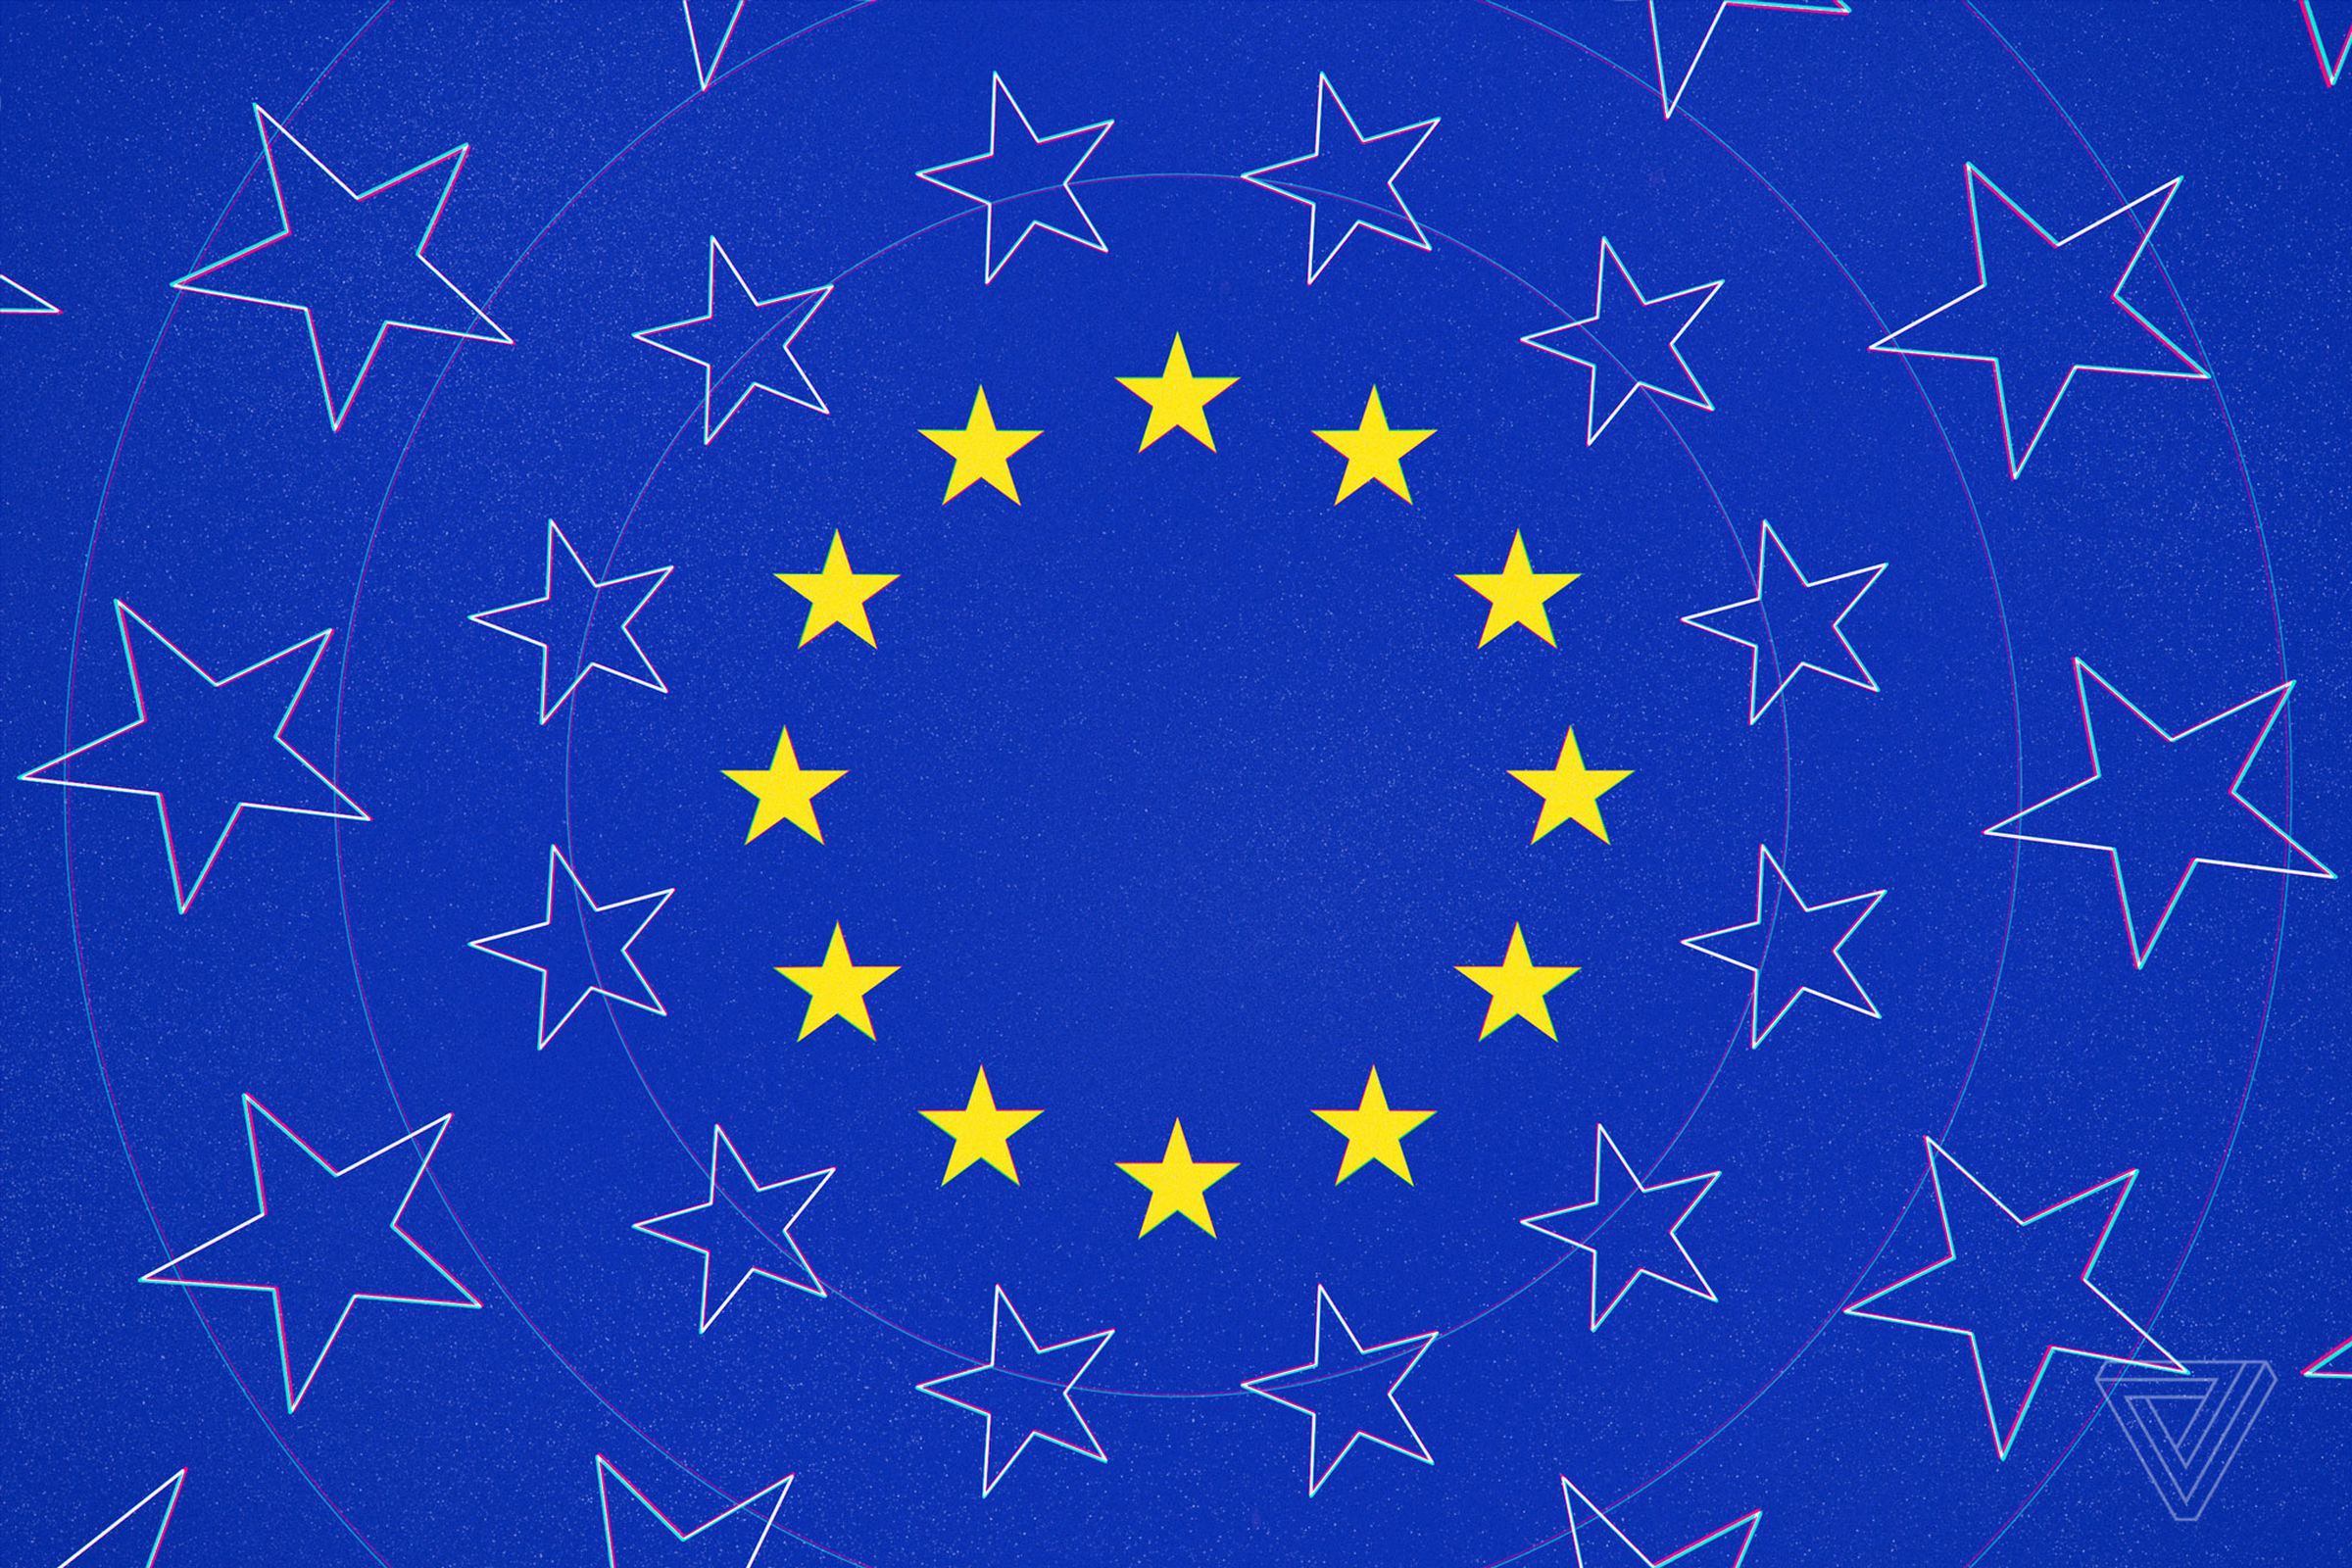 A circle of 12 gold stars representing the European Union.